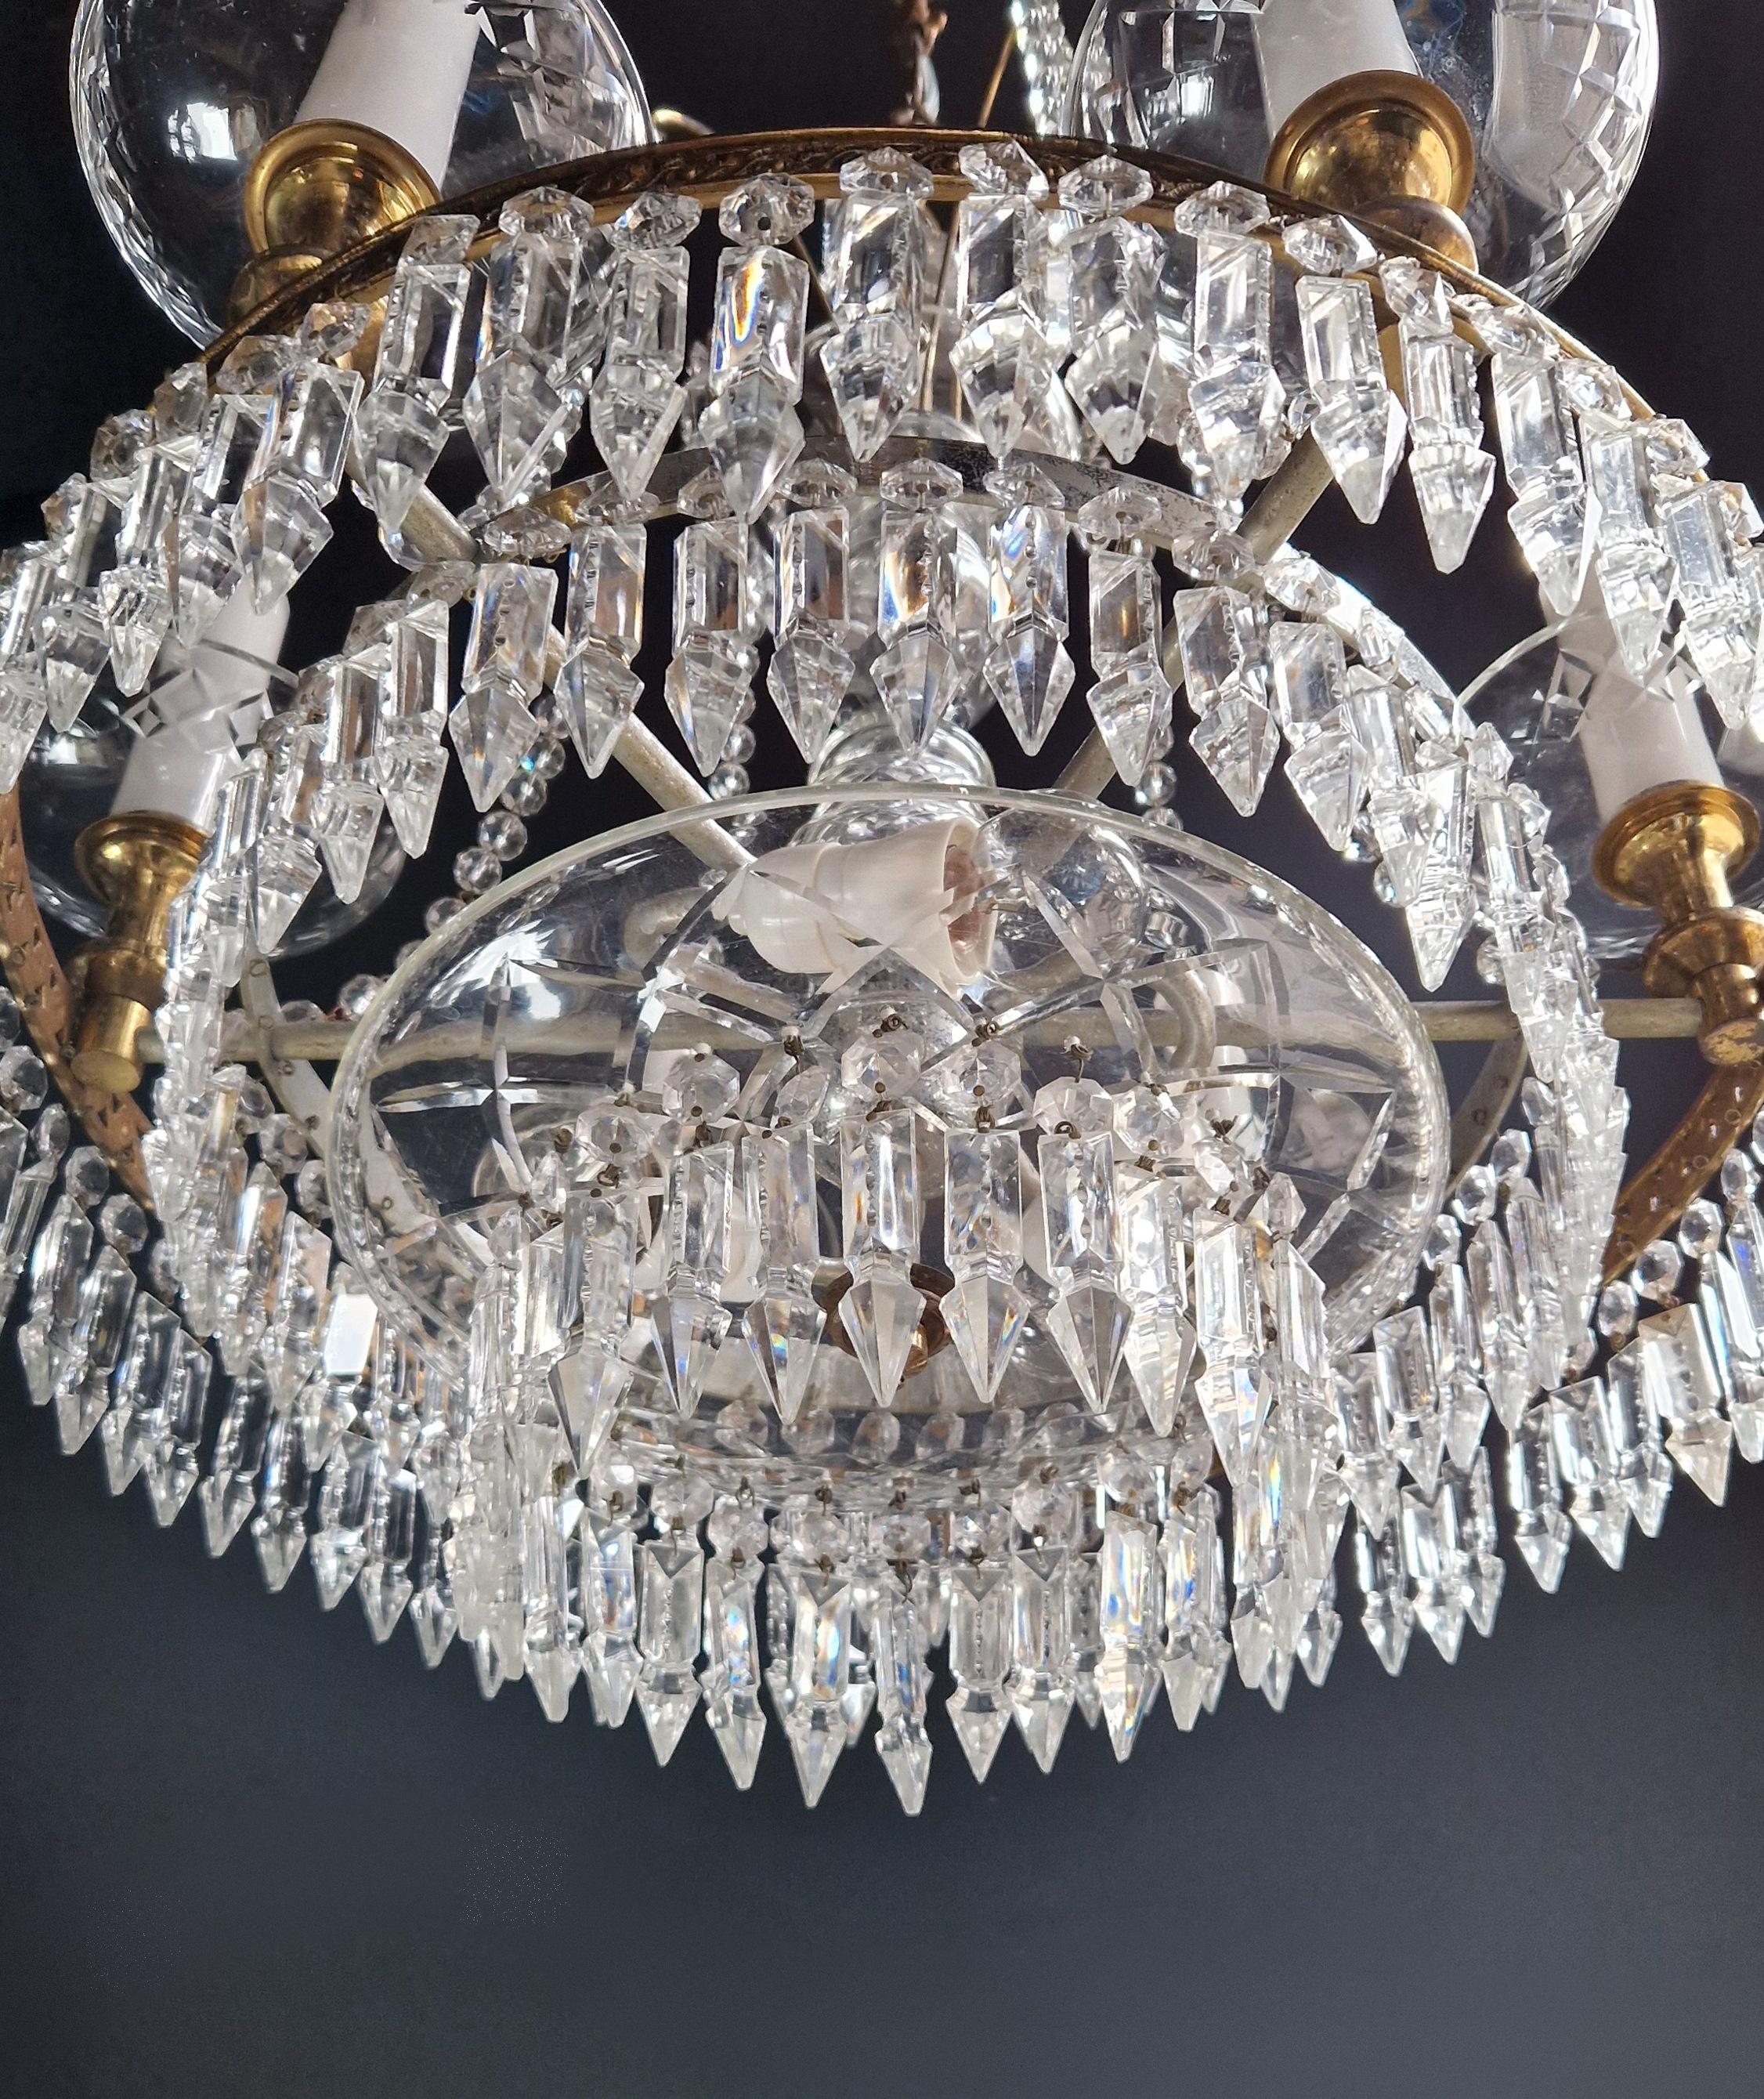 Introducing an exquisite Crystal Bohemian Glass Candelabrum Brass Bronze Antique Chandelier in the style of Luis Art. This chandelier has been lovingly restored in Berlin and is now wired to work with US electrical systems. It has been re-wired and